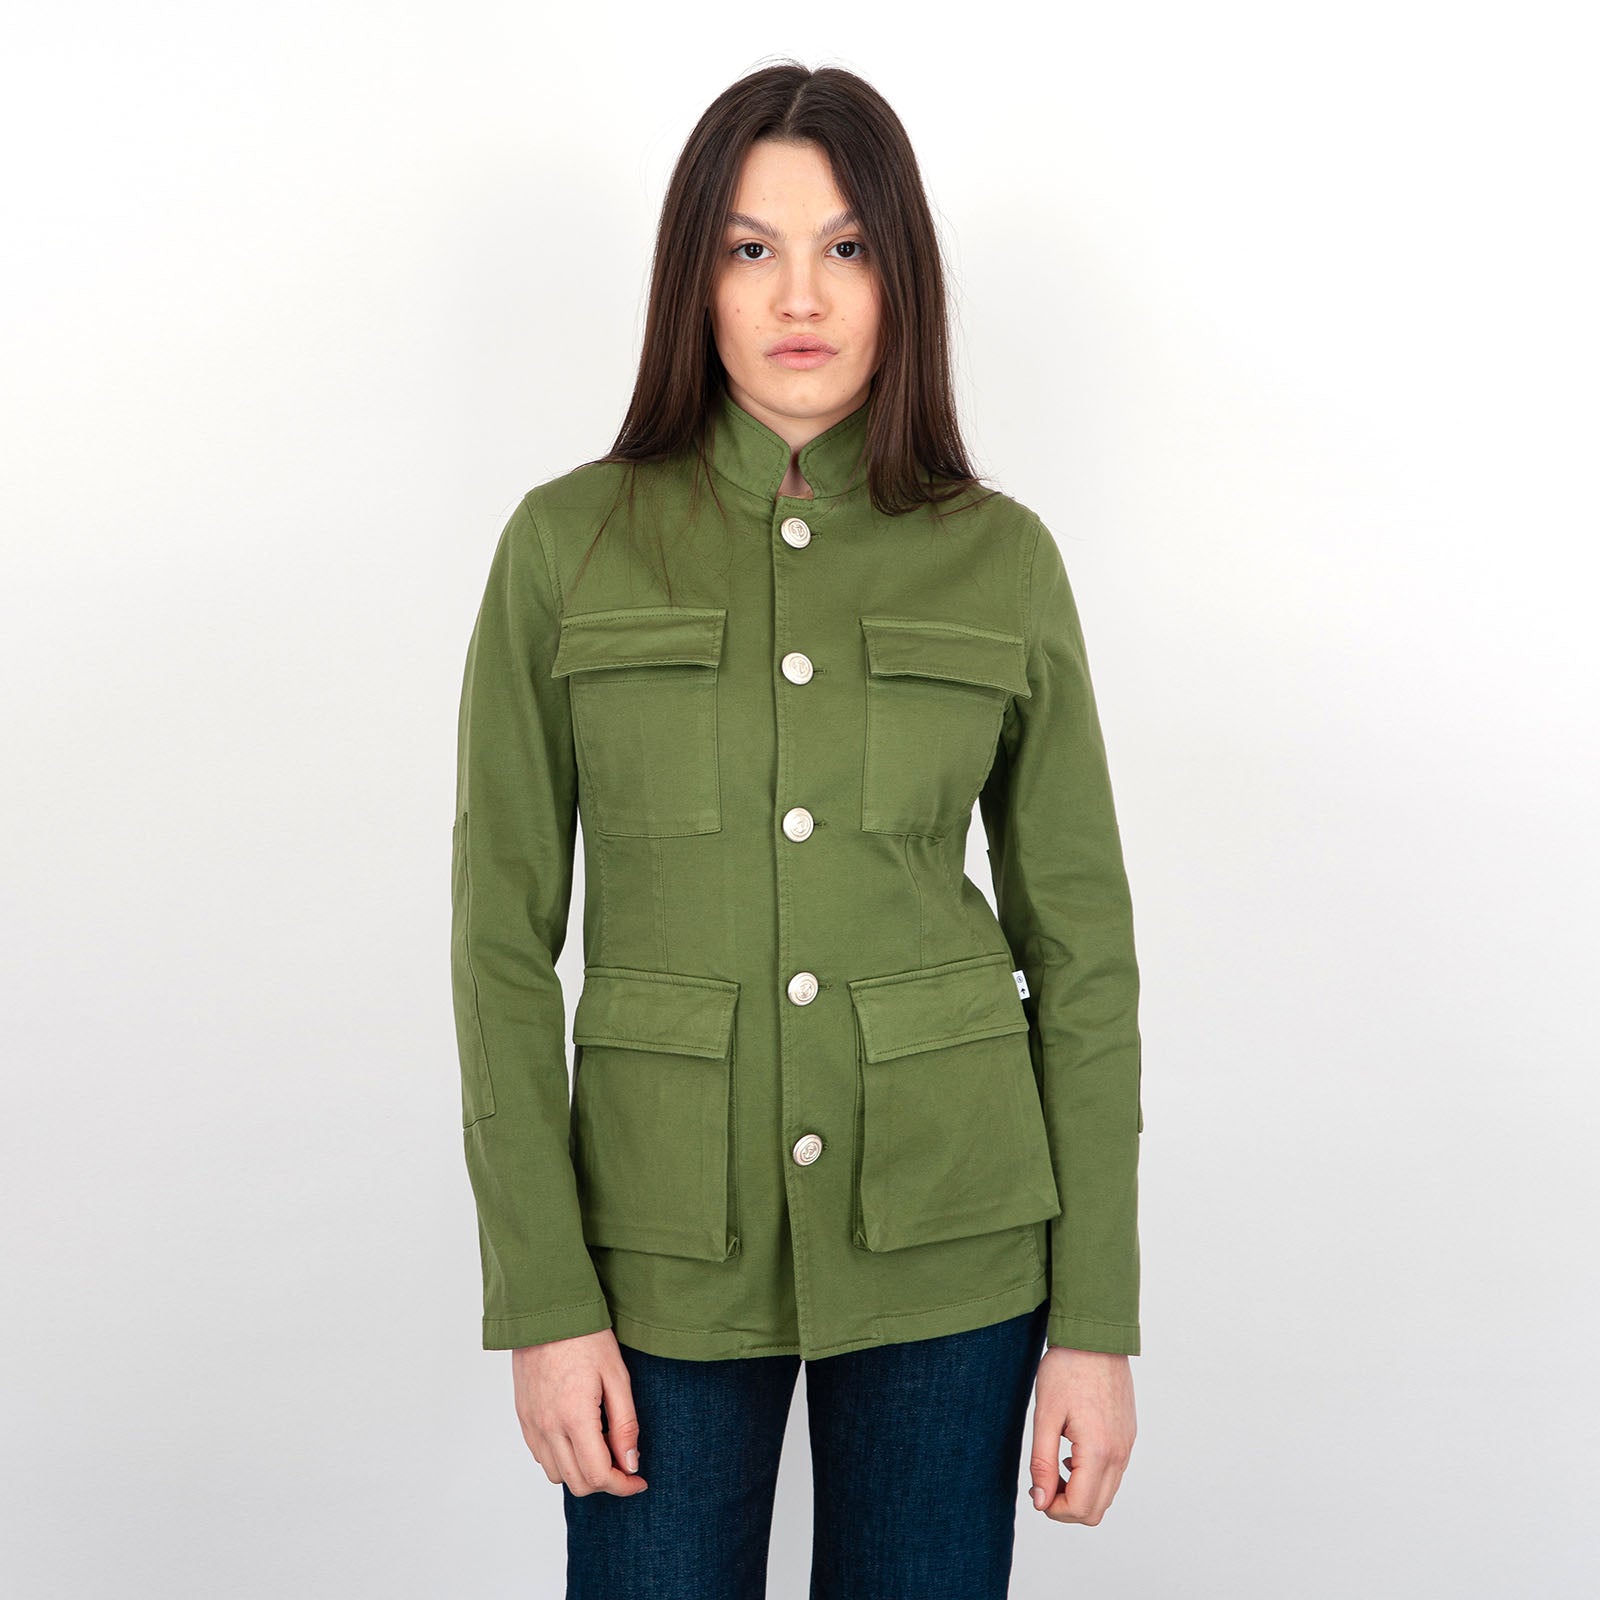 Department Five Green Military Cotton Field Jacket - 2